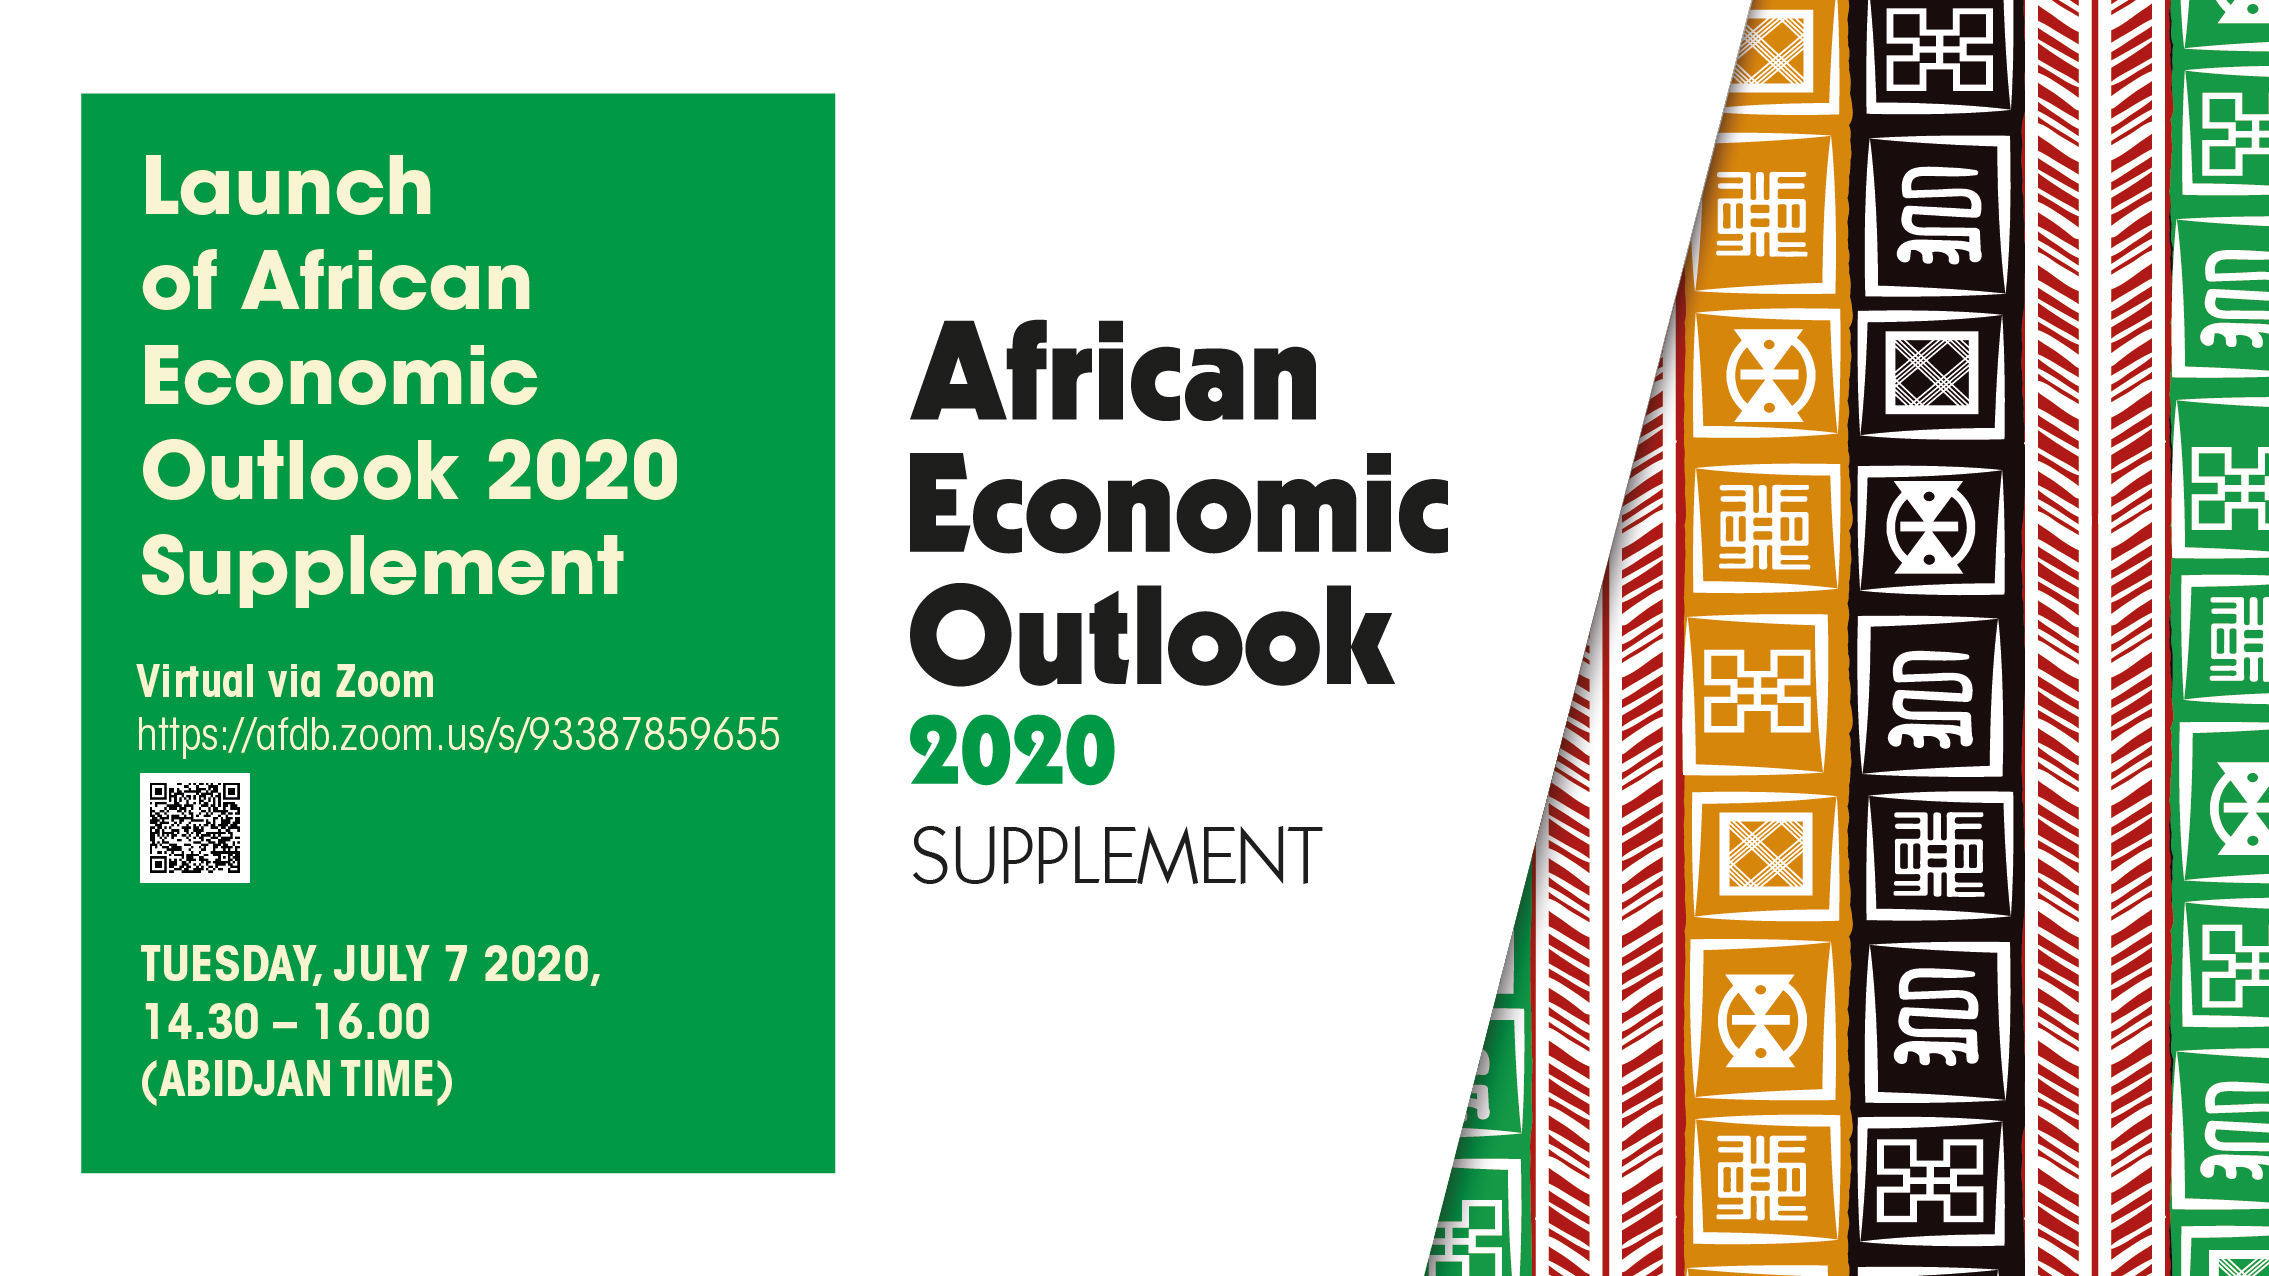 AfDB to launch African Economic Outlook 2020 Supplement